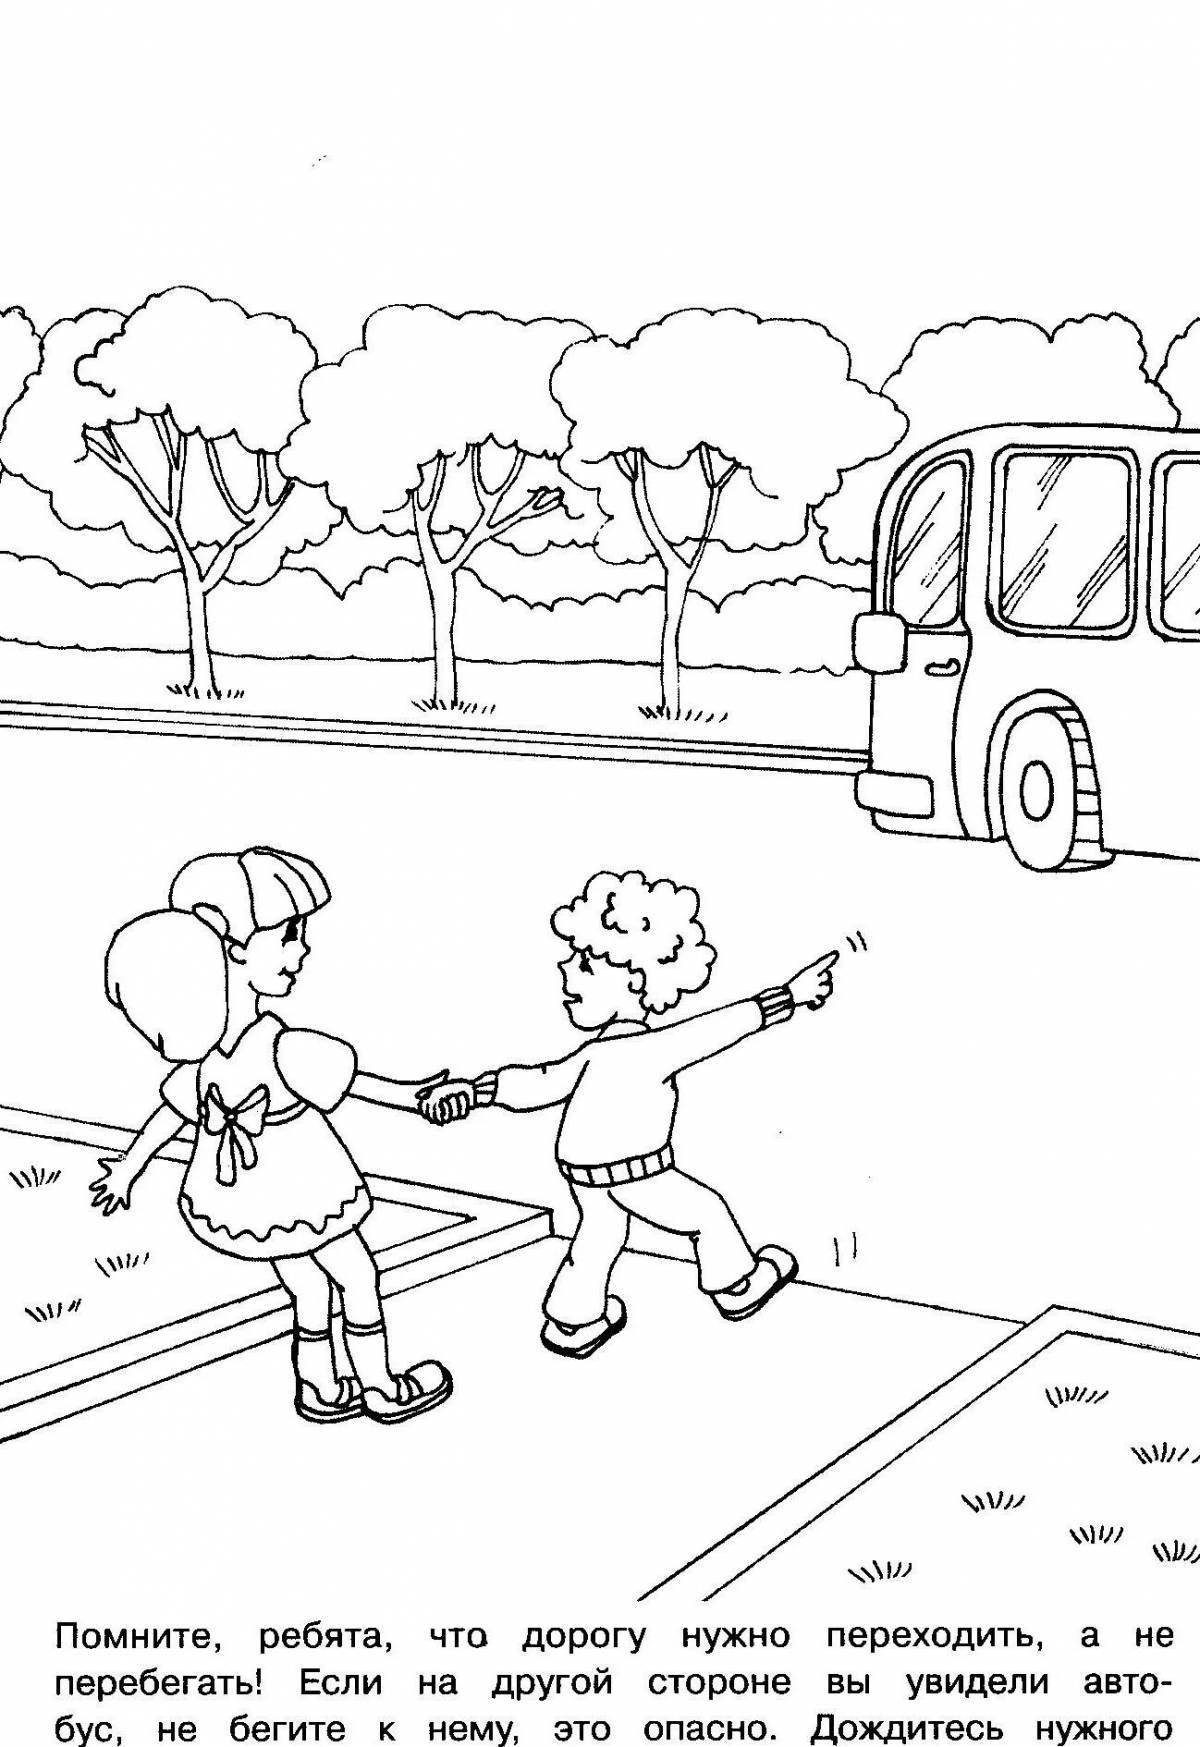 Funny 1st grade traffic rule coloring book